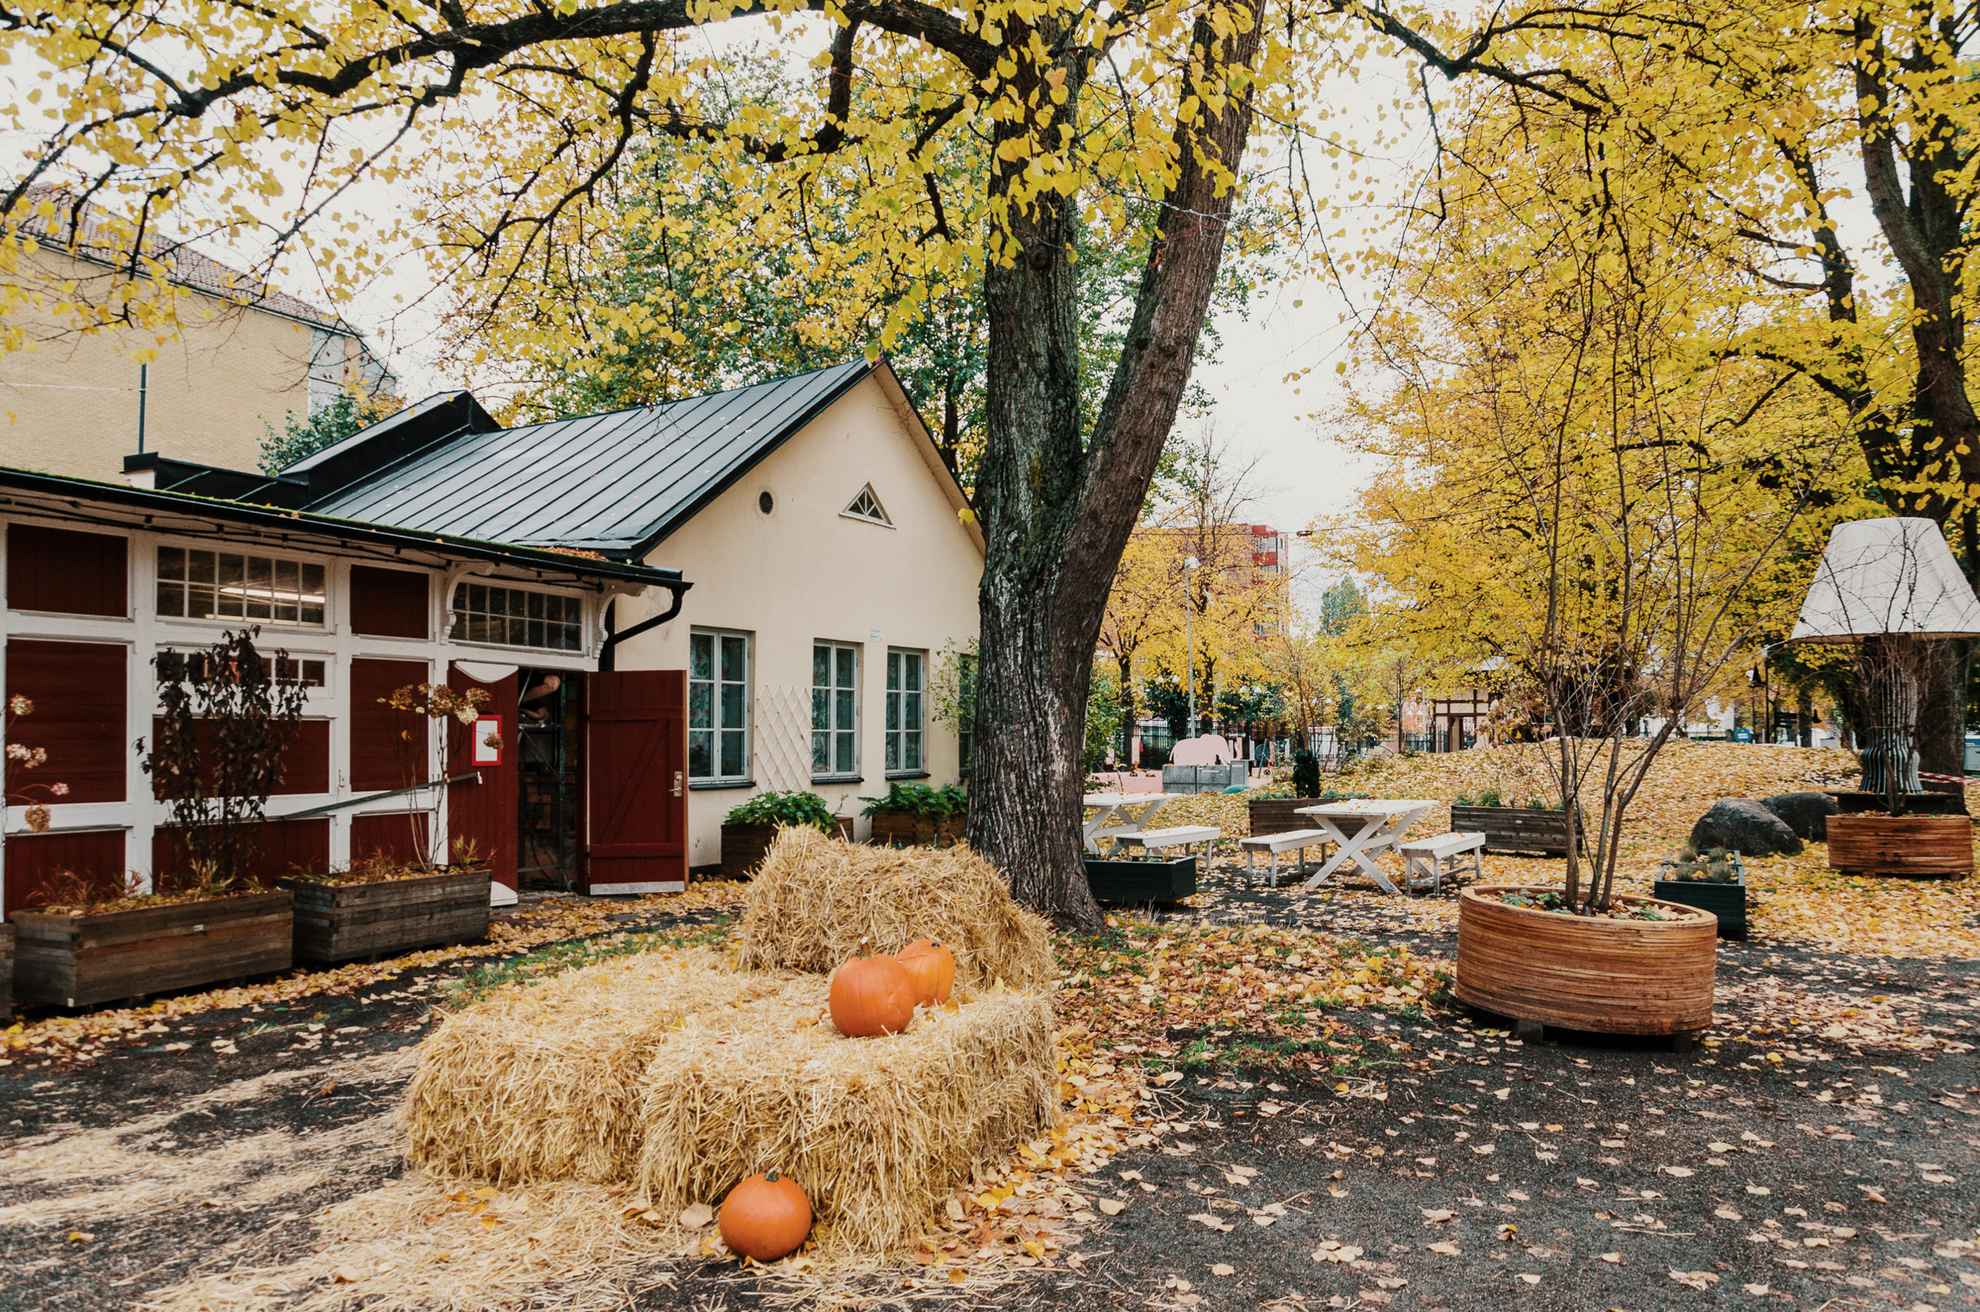 Some pumpkins and hay decorations in a  park